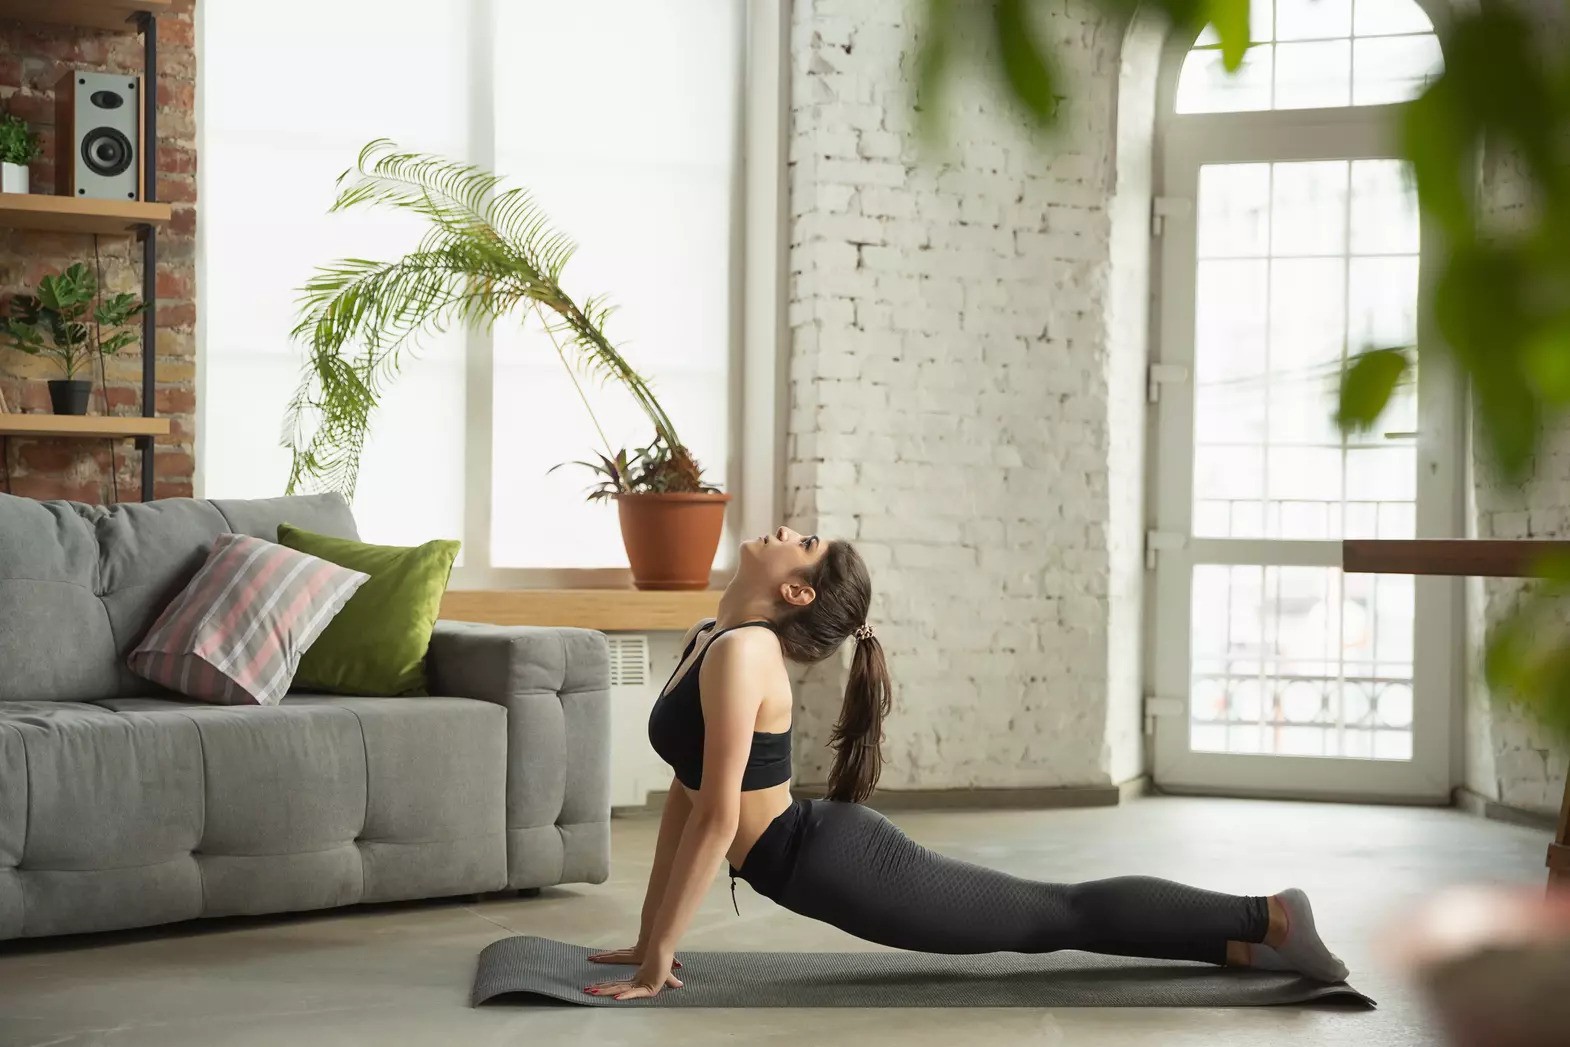 THE BENEFITS OF PILATES: MORE THAN JUST A WORKOUT